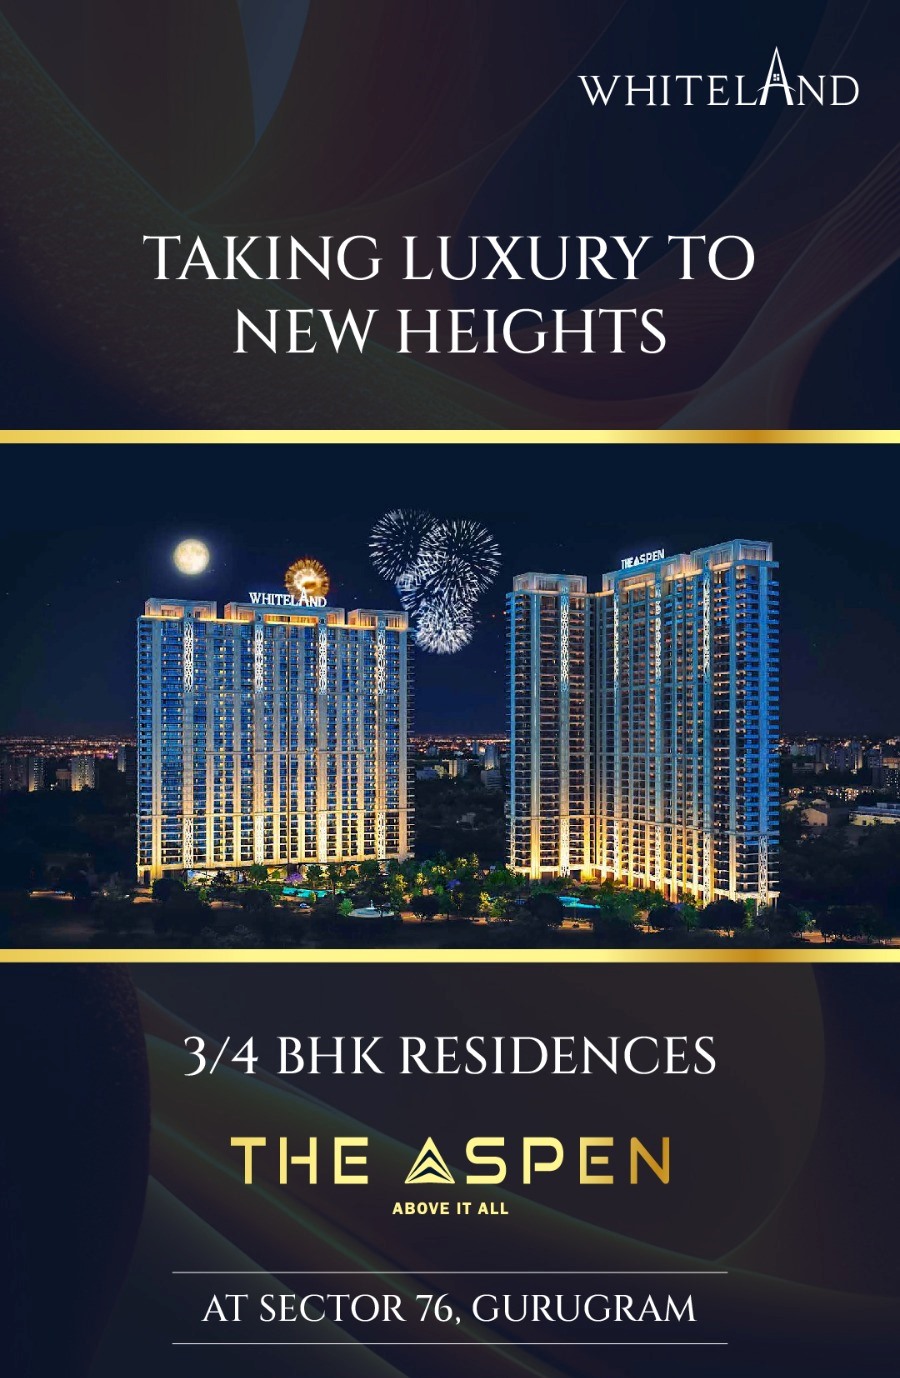 Taking luxury to new hights at Whiteland The Aspen in Sector 76, Gurgaon Update